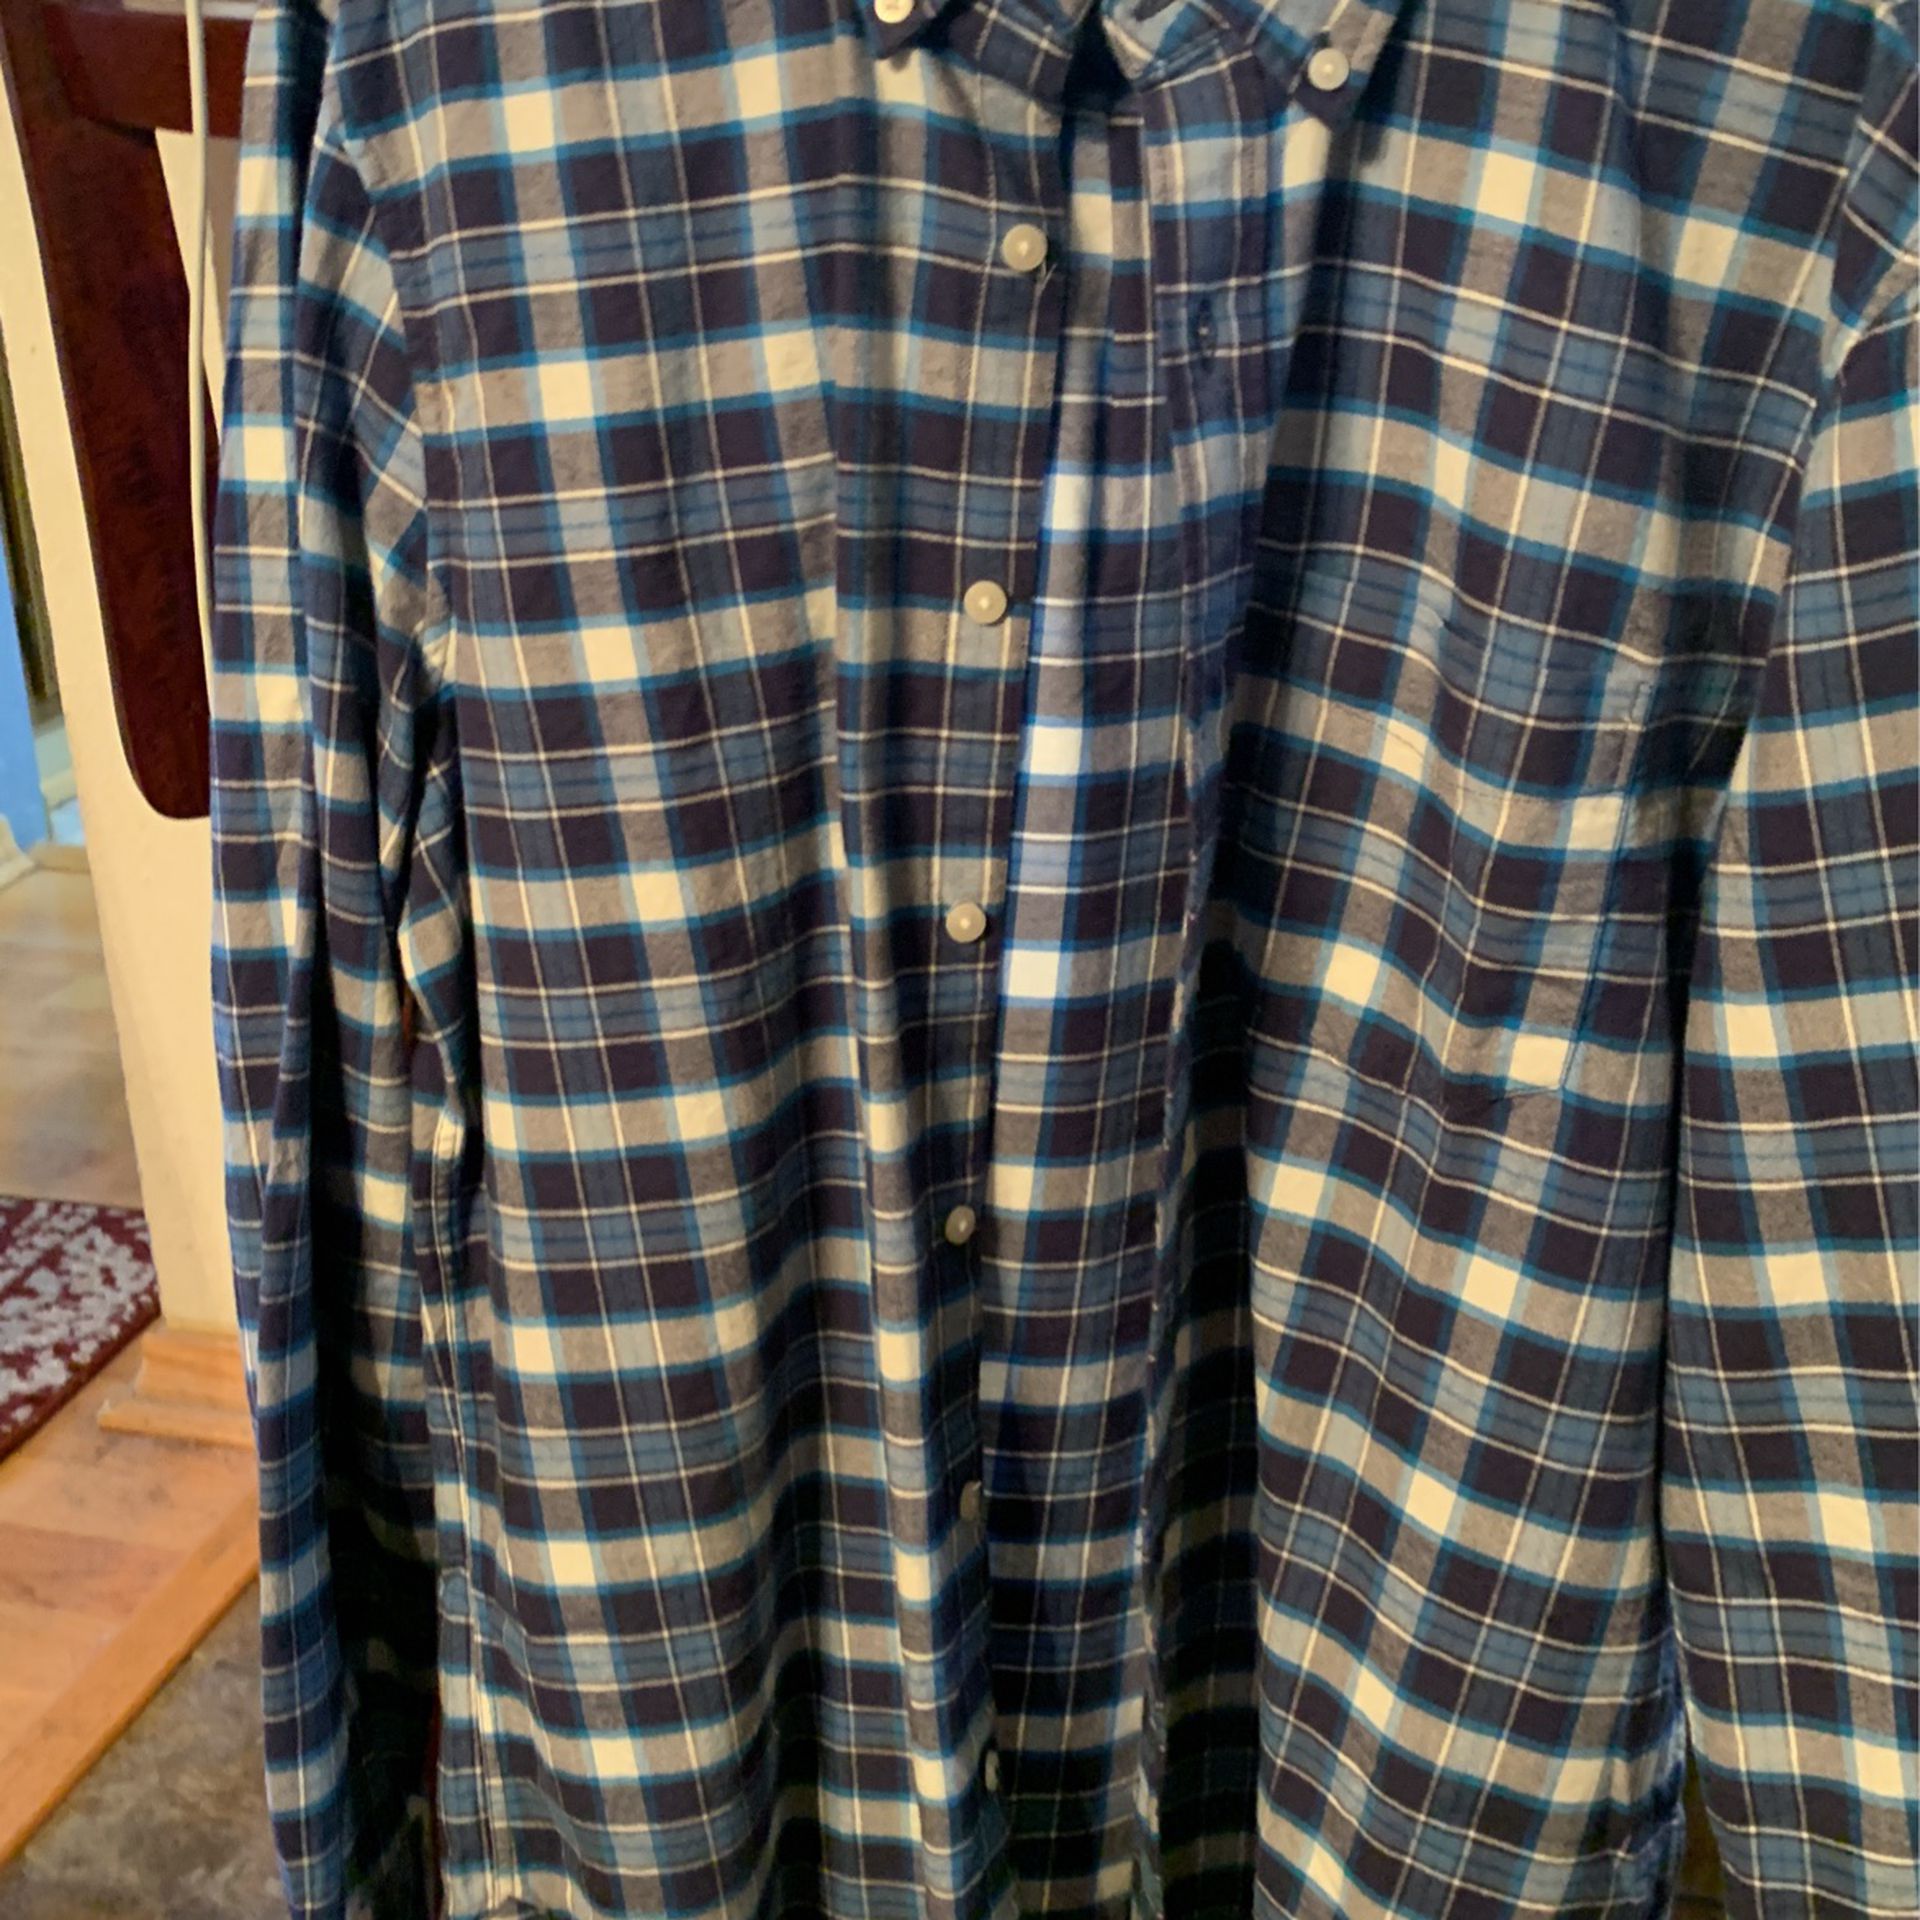 American Eagle Plaid Long Sleeve Button Up Size Large